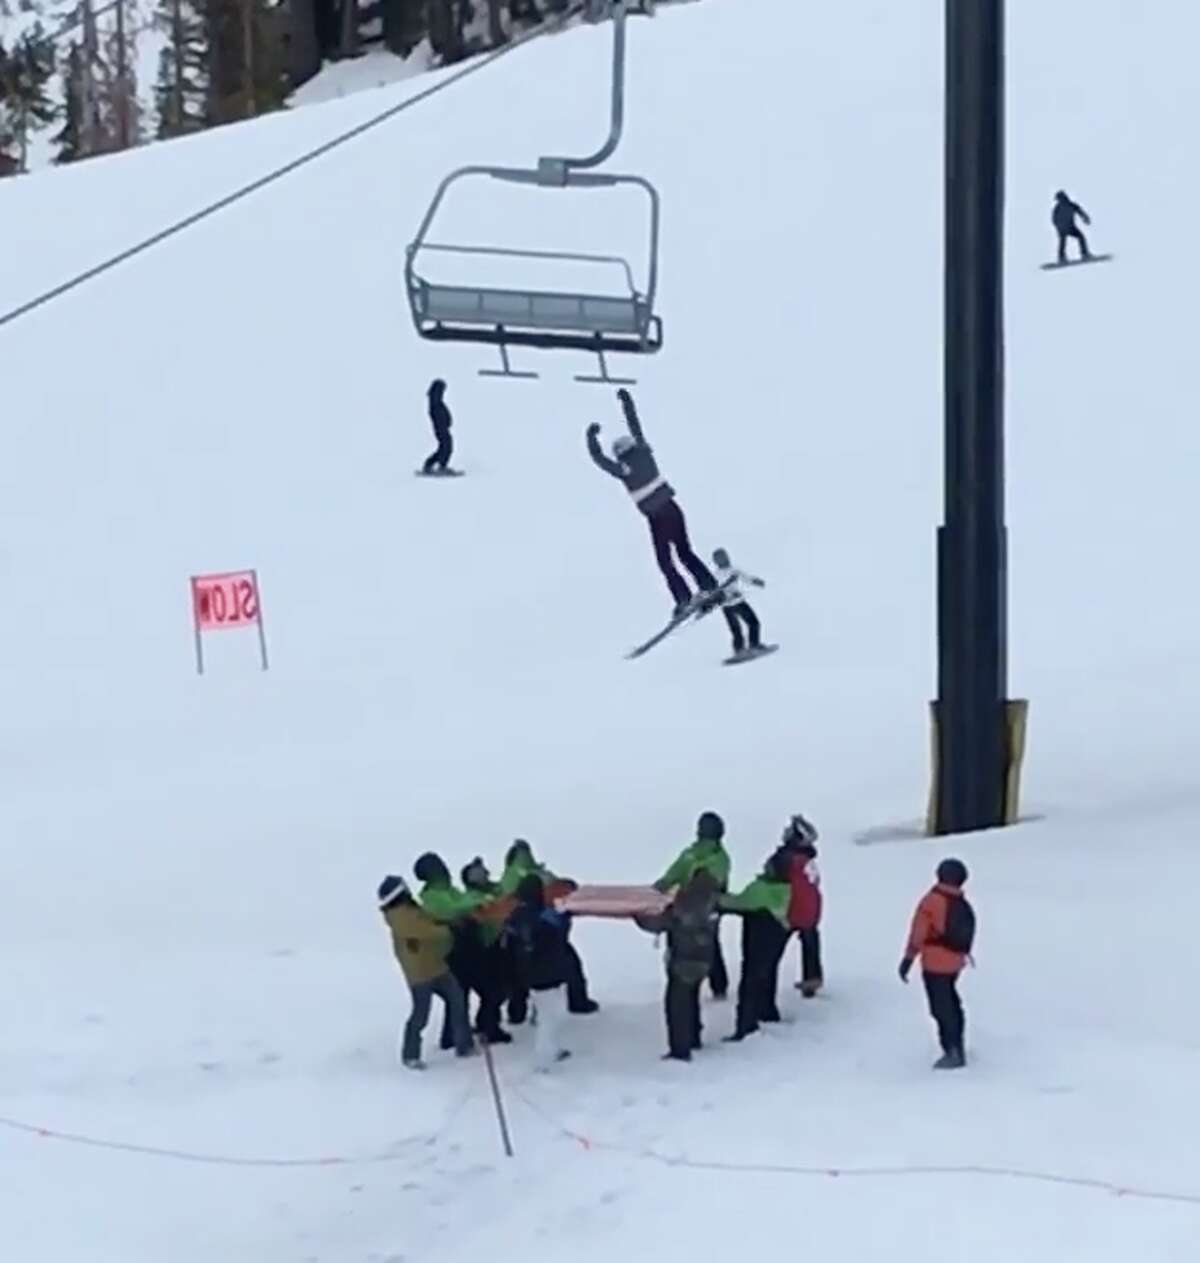 Terrifying Moment A Teen Skiier Dangles From A Mammoth Chairlift Before Dropping Into Rescue Net